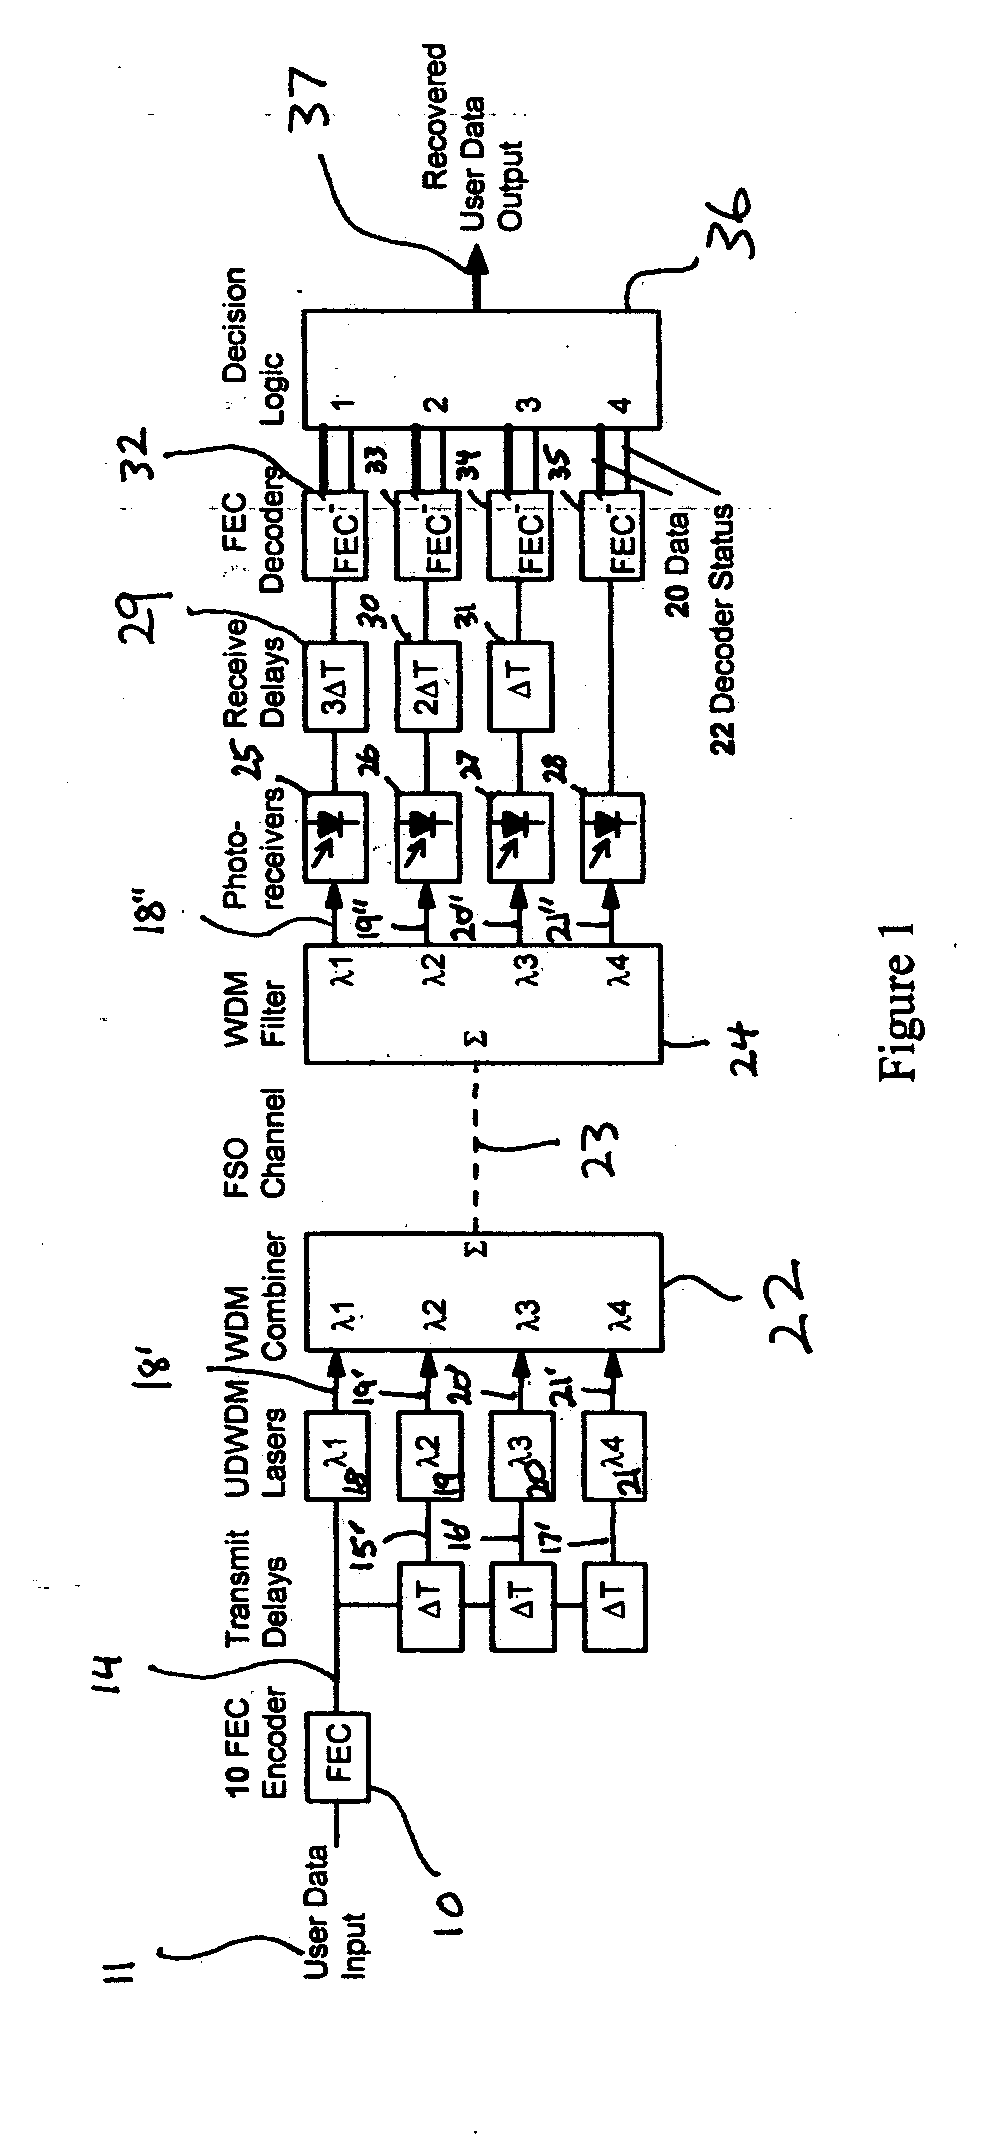 Fade-resistant forward error correction method for free-space optical communications systems